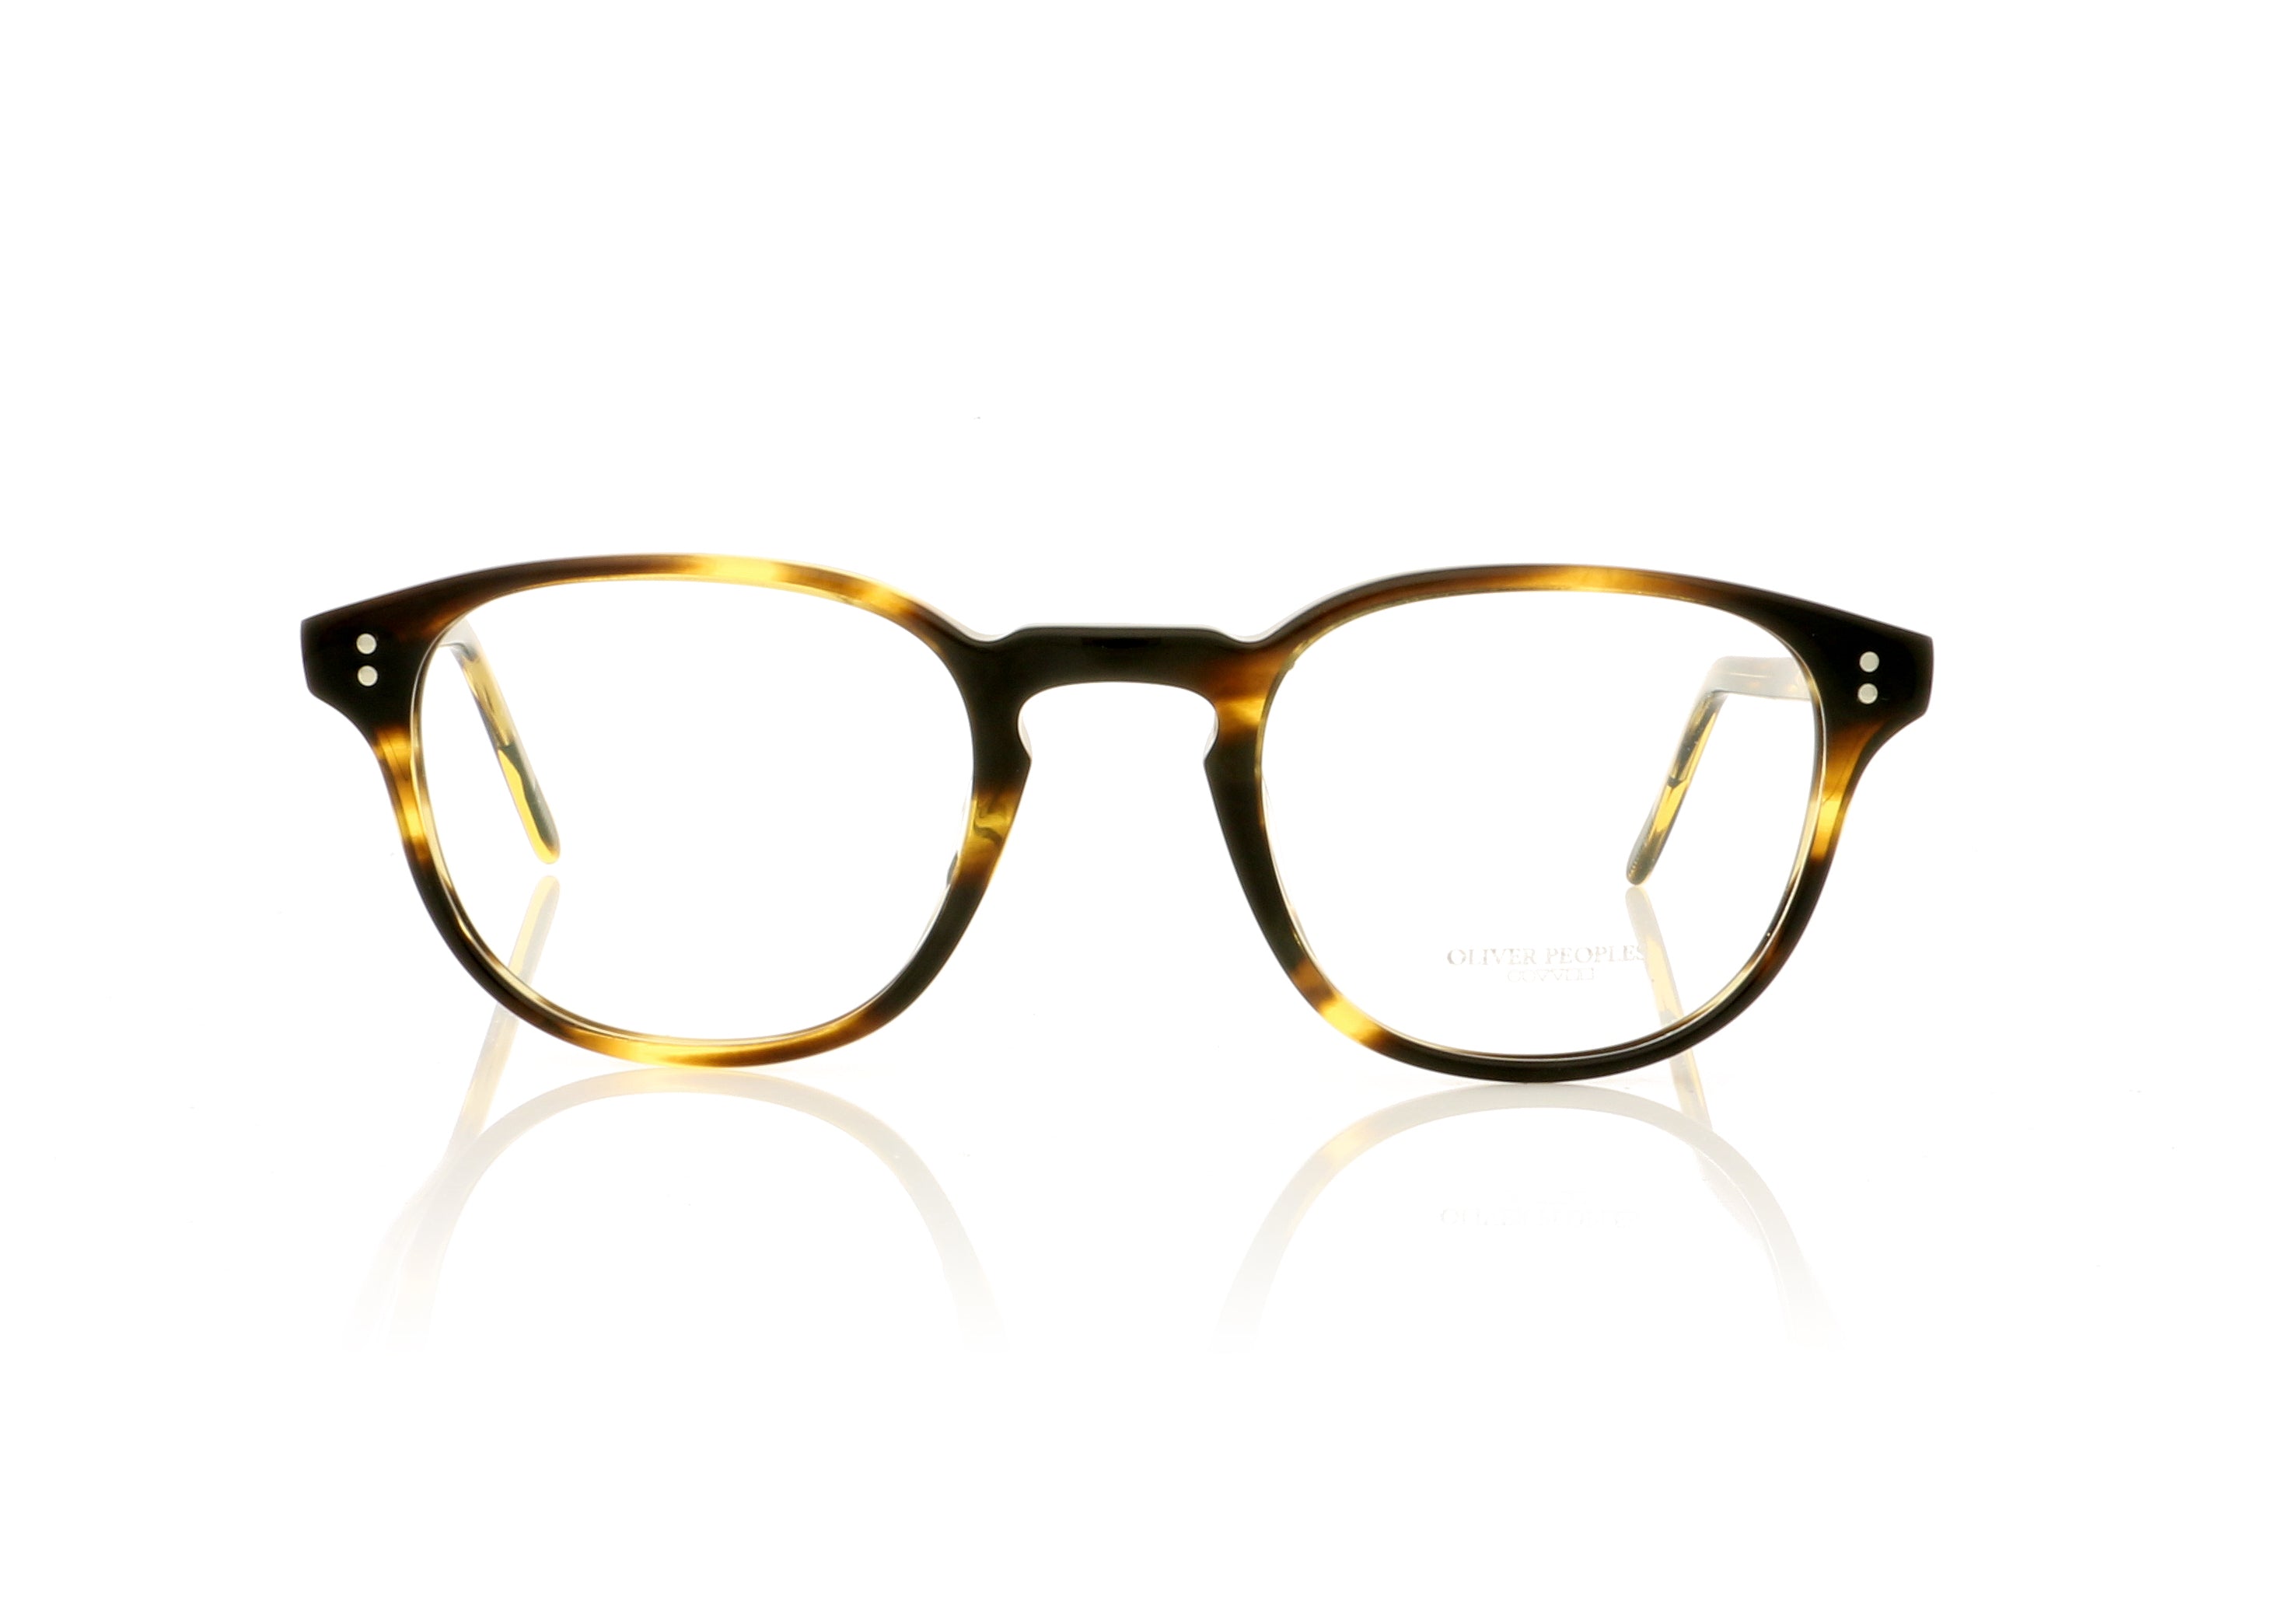 Oliver Peoples Fairmont OV5219 1003 Cocobolo Glasses | The Eye Place